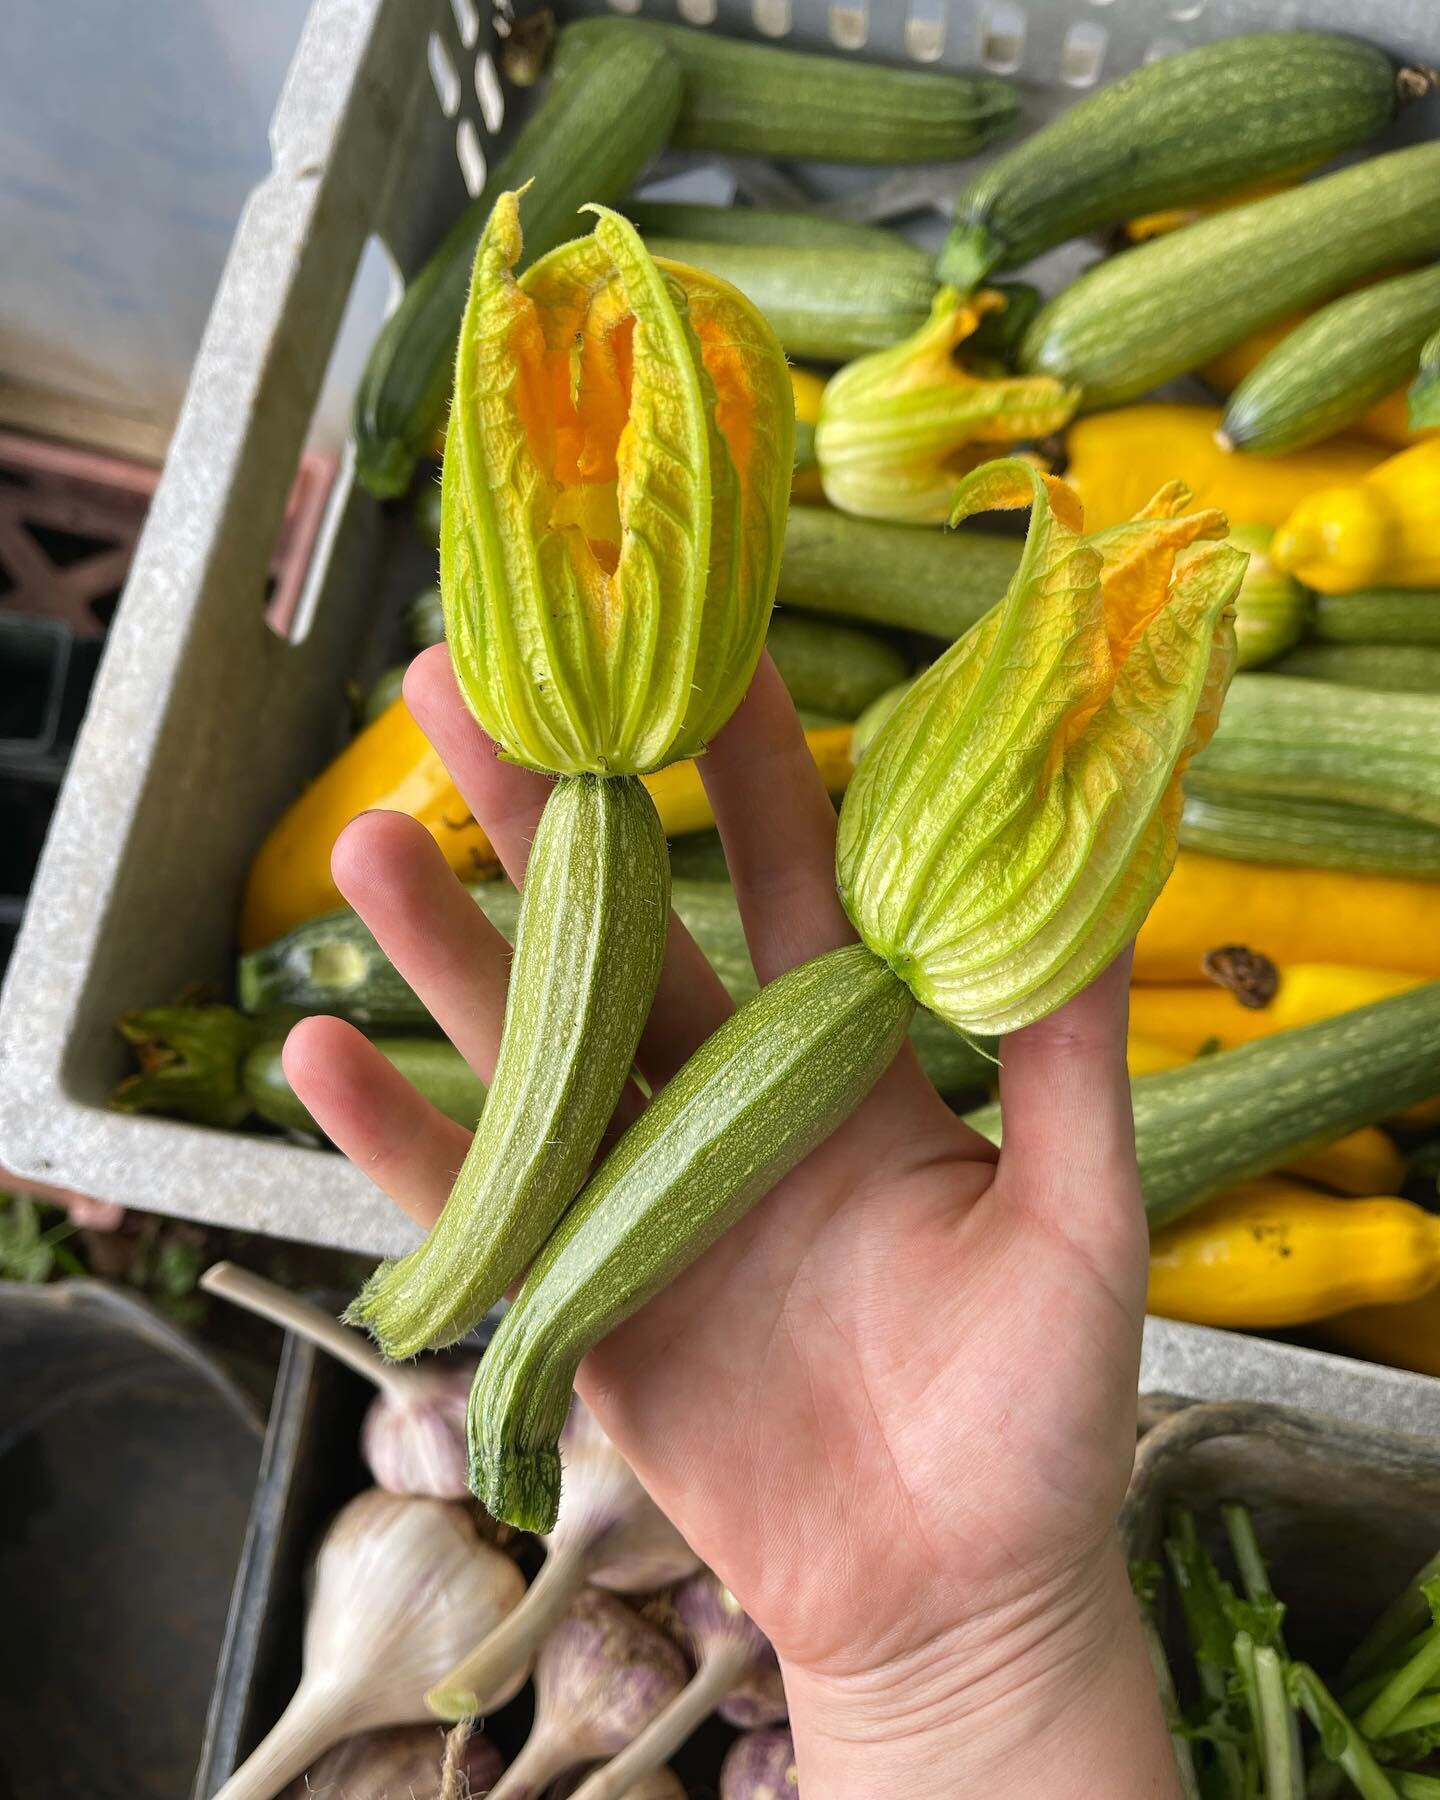 What is your go to courgette recipe? 

It&rsquo;s easy when growing courgettes at home to blink and find one that is huge! I&rsquo;m a massive fan of using any ones you&rsquo;ve missed in a Courgette and Lime cake. Super good way of not wasting any v